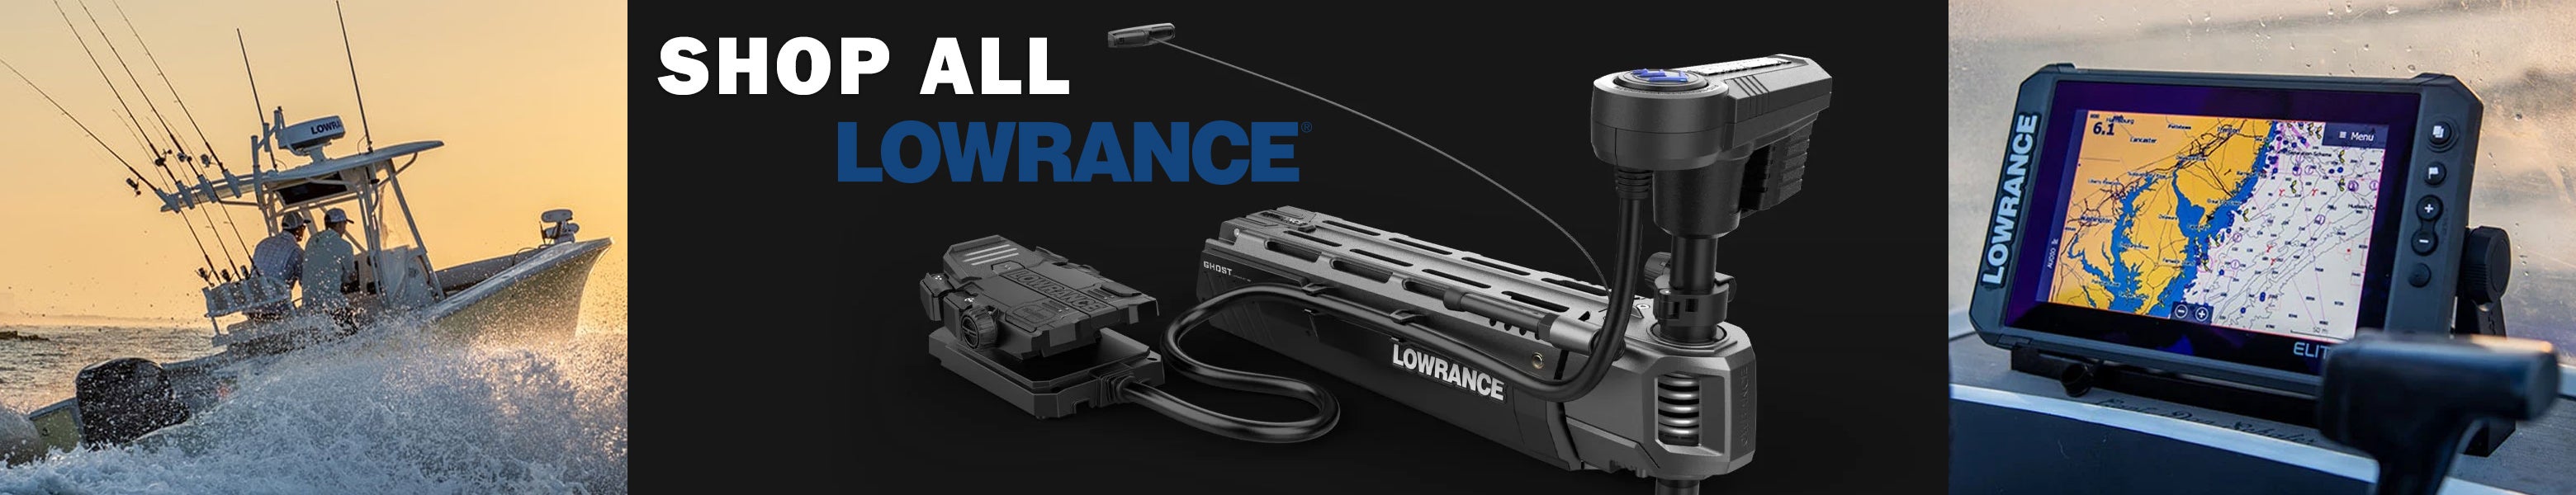 Shop All Lowrance